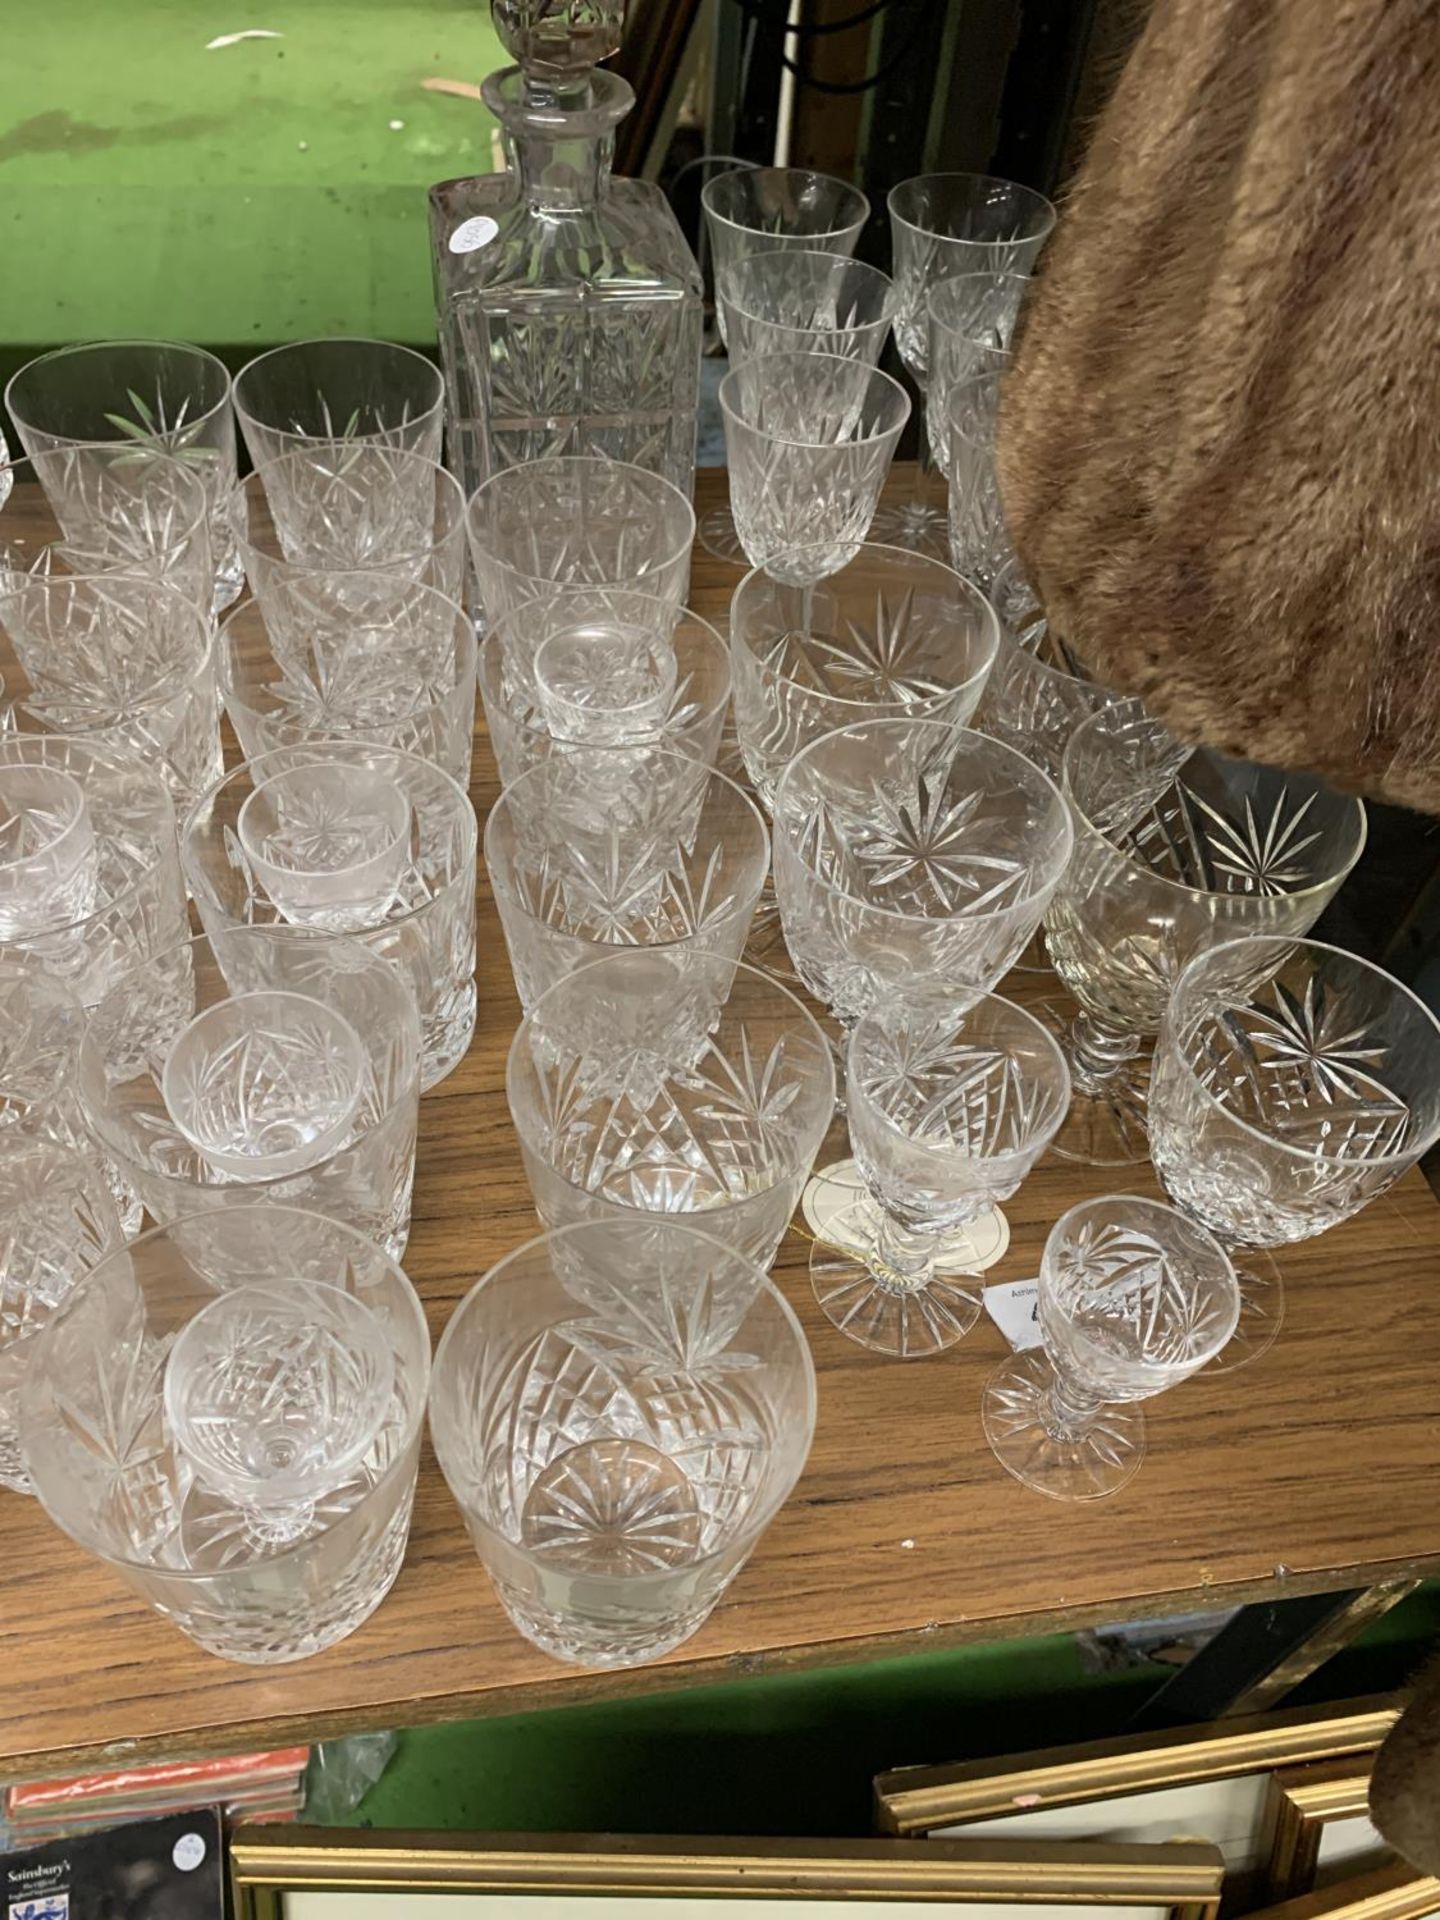 A LARGE QUANTITY OF GLASSES TO INCLUDE WINE, CHAMPAGNE FLUTES, SHERRY, BRANDY, TUMBLERS, ETC PLUS - Image 5 of 5